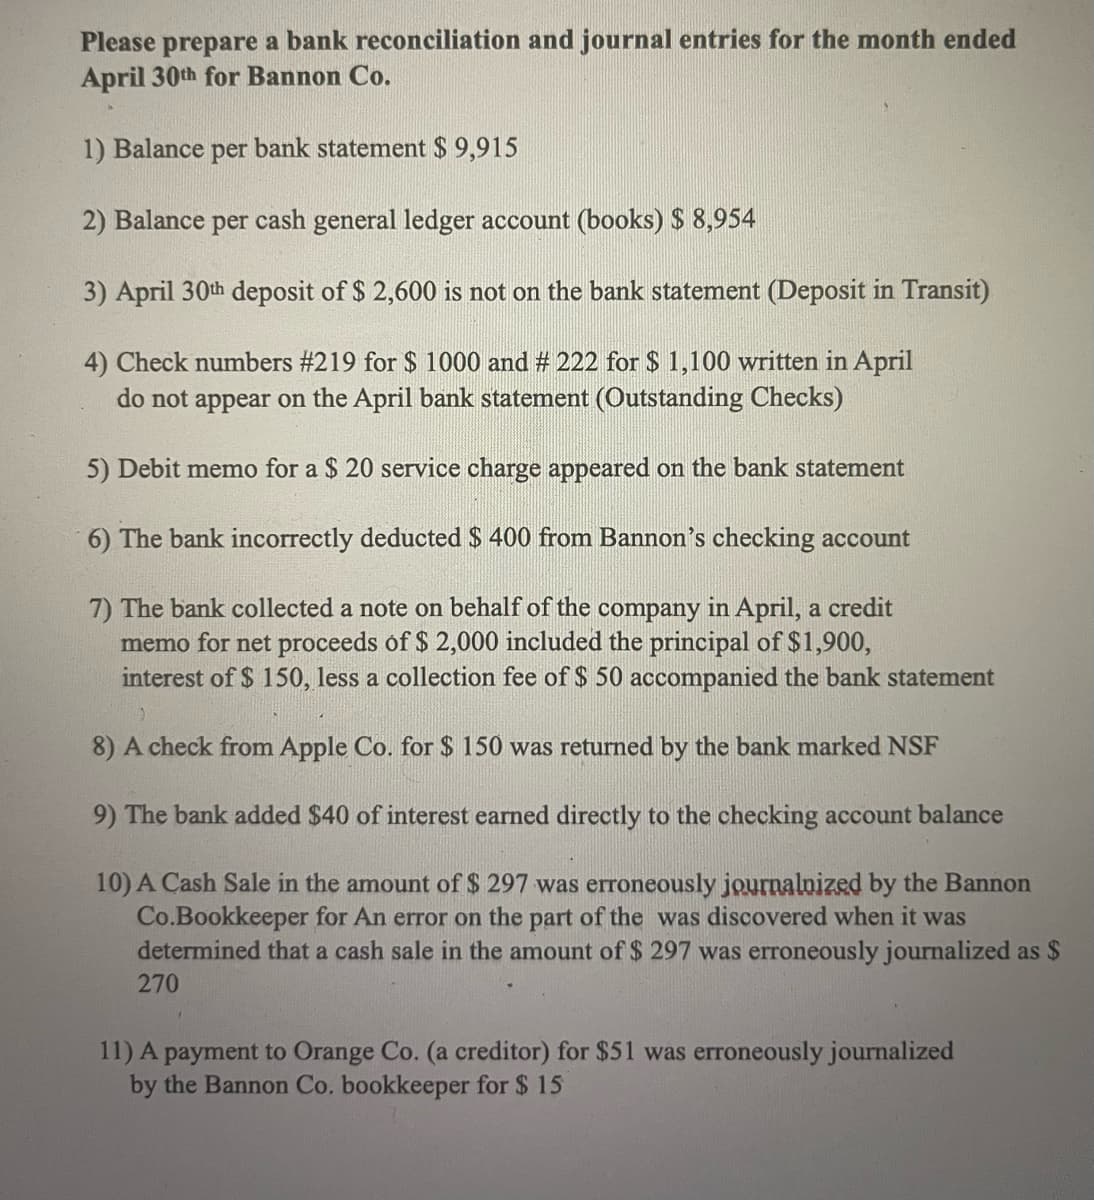 Please prepare a bank reconciliation and journal entries for the month ended
April 30th for Bannon Co.
1) Balance per bank statement $ 9,915
2) Balance per cash general ledger account (books) $ 8,954
3) April 30th deposit of $ 2,600 is not on the bank statement (Deposit in Transit)
4) Check numbers #219 for $ 1000 and # 222 for $ 1,100 written in April
do not appear on the April bank statement (Outstanding Checks)
5) Debit memo for a $ 20 service charge appeared on the bank statement
6) The bank incorrectly deducted $ 400 from Bannon's checking account
7) The bank collected a note on behalf of the company in April, a credit
memo for net proceeds óf $ 2,000 included the principal of $1,900,
interest of $ 150, less a collection fee of $ 50 accompanied the bank statement
8) A check from Apple Co. for $ 150 was returned by the bank marked NSF
9) The bank added $40 of interest earned directly to the checking account balance
10) A Cash Sale in the amount of $ 297 was erroneously journalnized by the Bannon
Co.Bookkeeper for An error on the part of the was discovered when it was
determined that a cash sale in the amount of $ 297 was erroneously journalized as $
270
11) A payment to Orange Co. (a creditor) for $51 was erroneously journalized
by the Bannon Co. bookkeeper for $ 15
